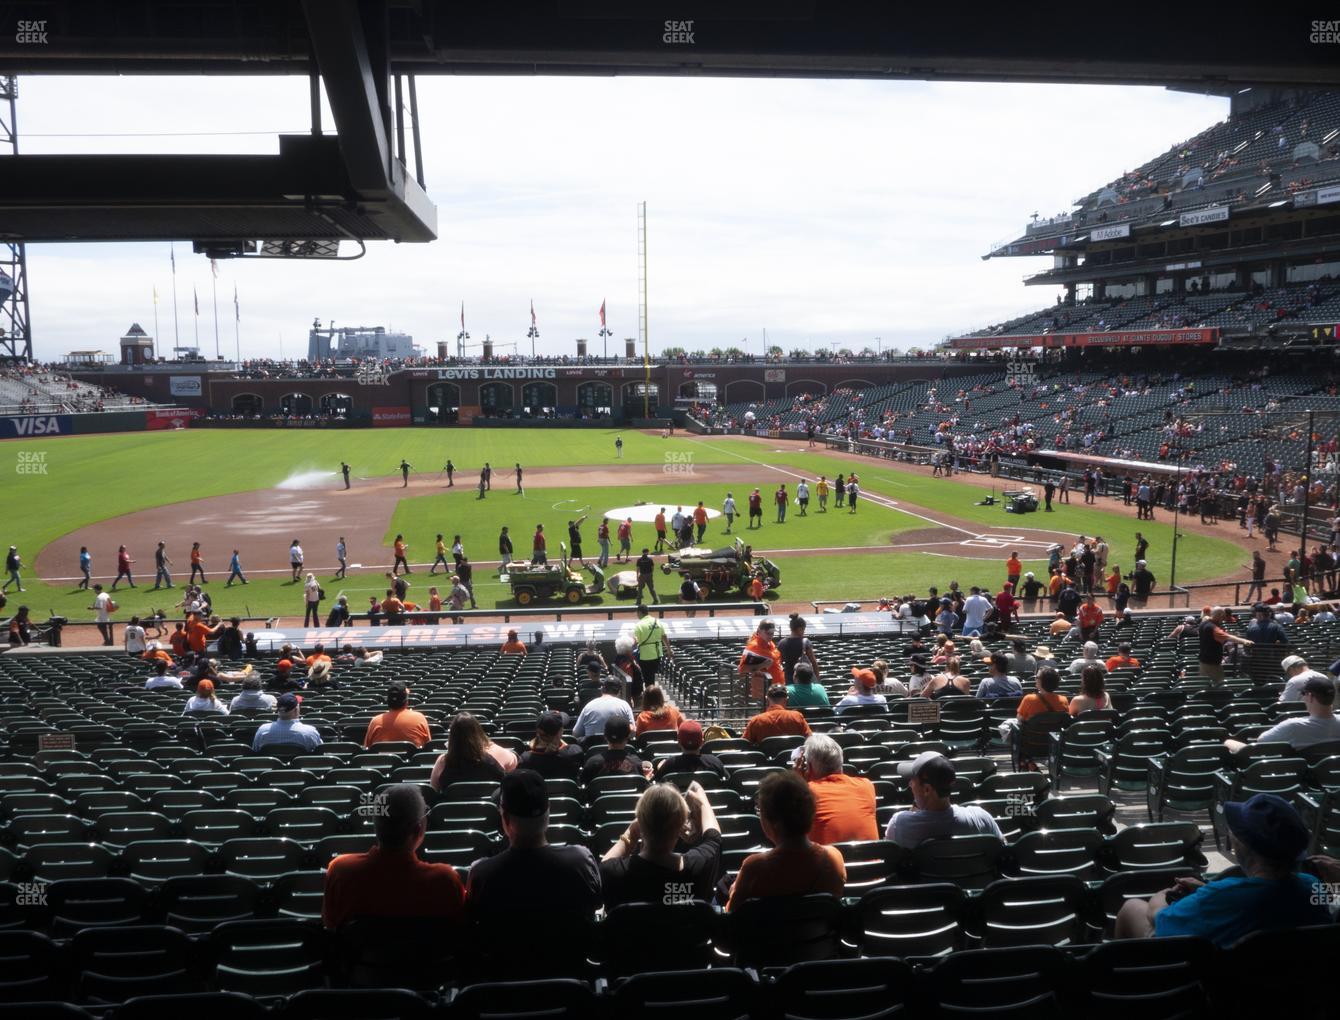 Sf Giants Seating Chart With Row Numbers